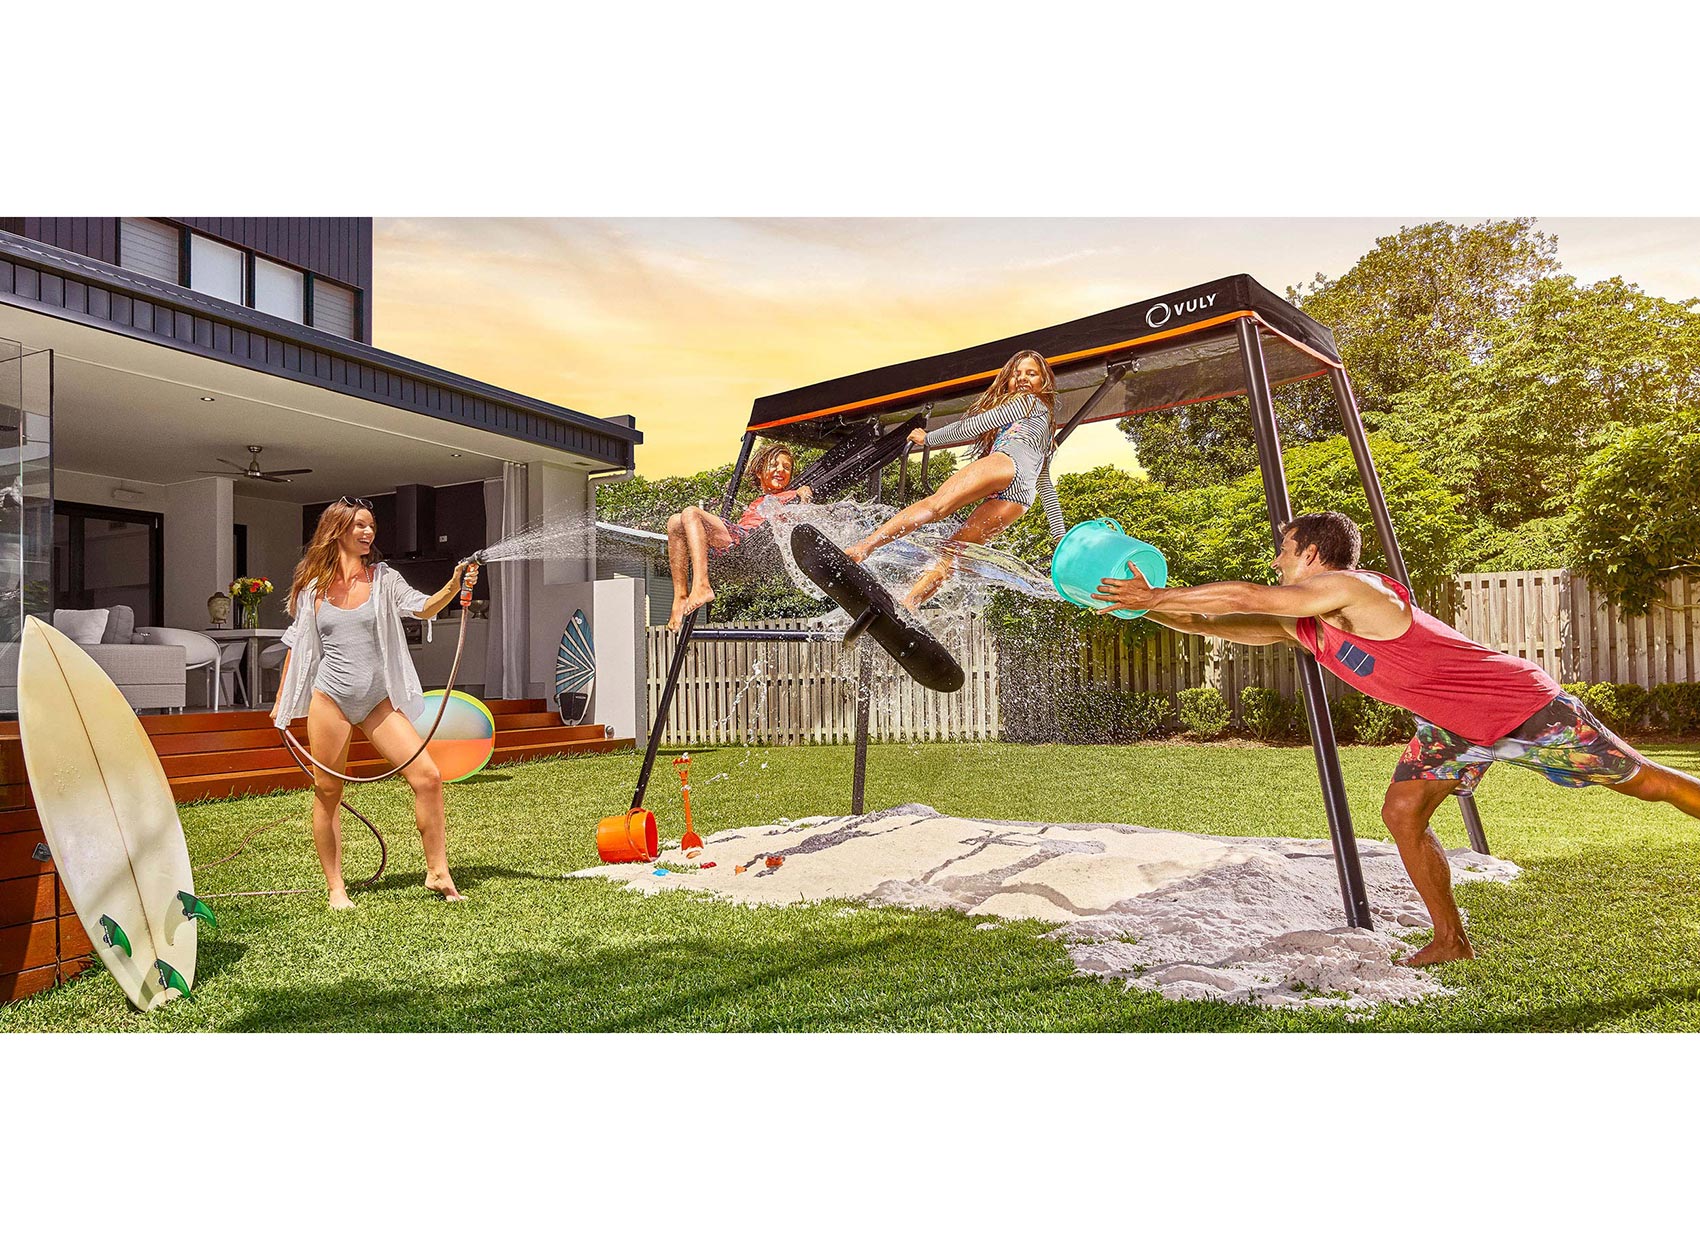 Nothing gets kids outside quite like the 360 Pro swing set and basketball.